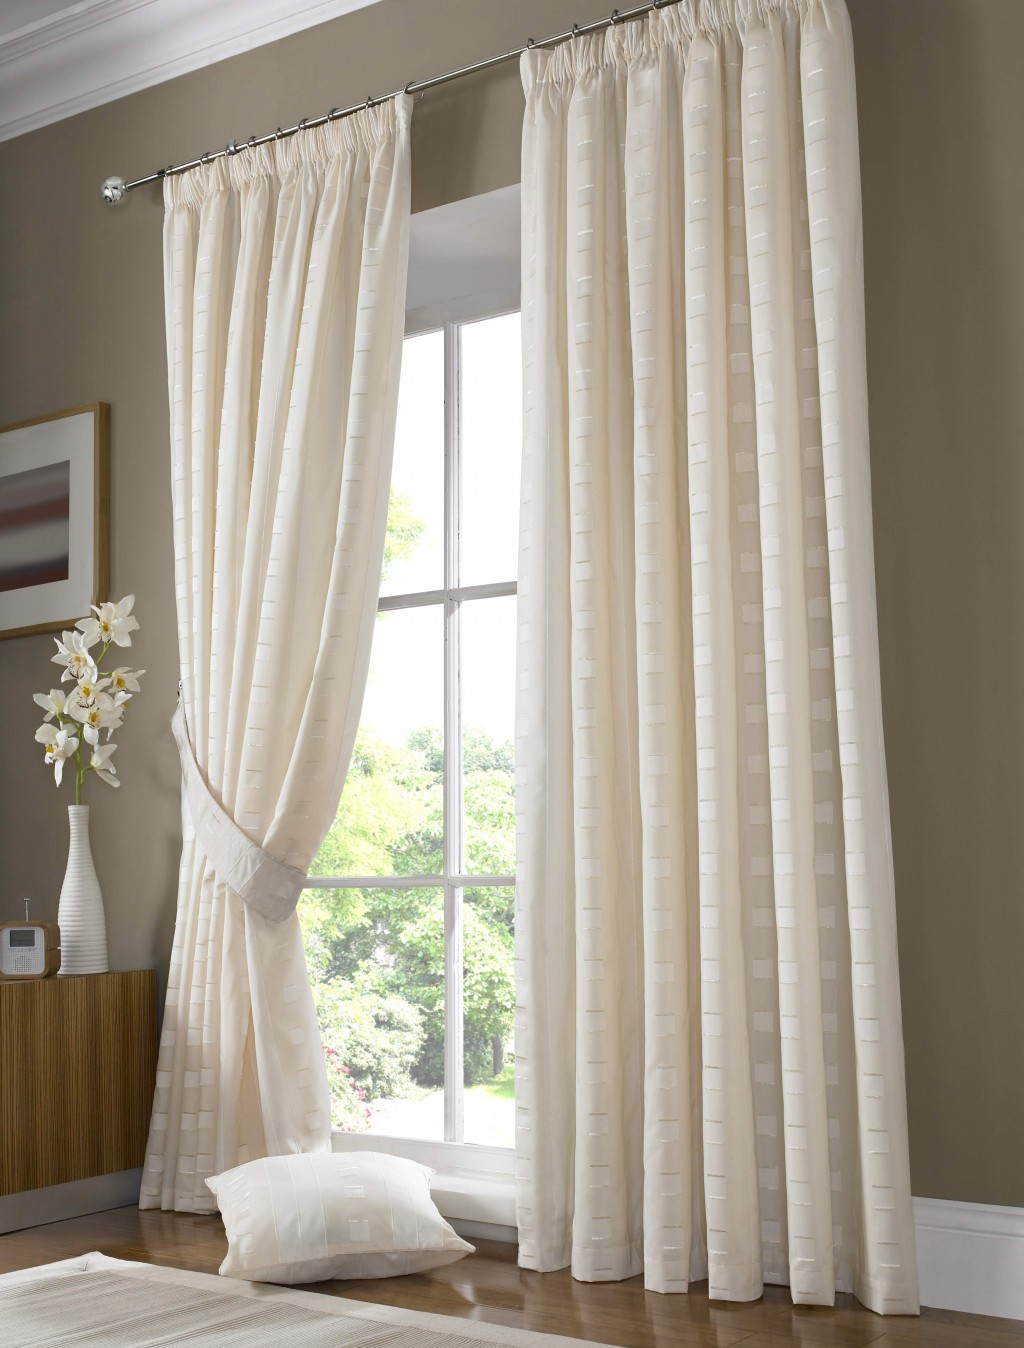 Curtains Or Blinds in Curtain